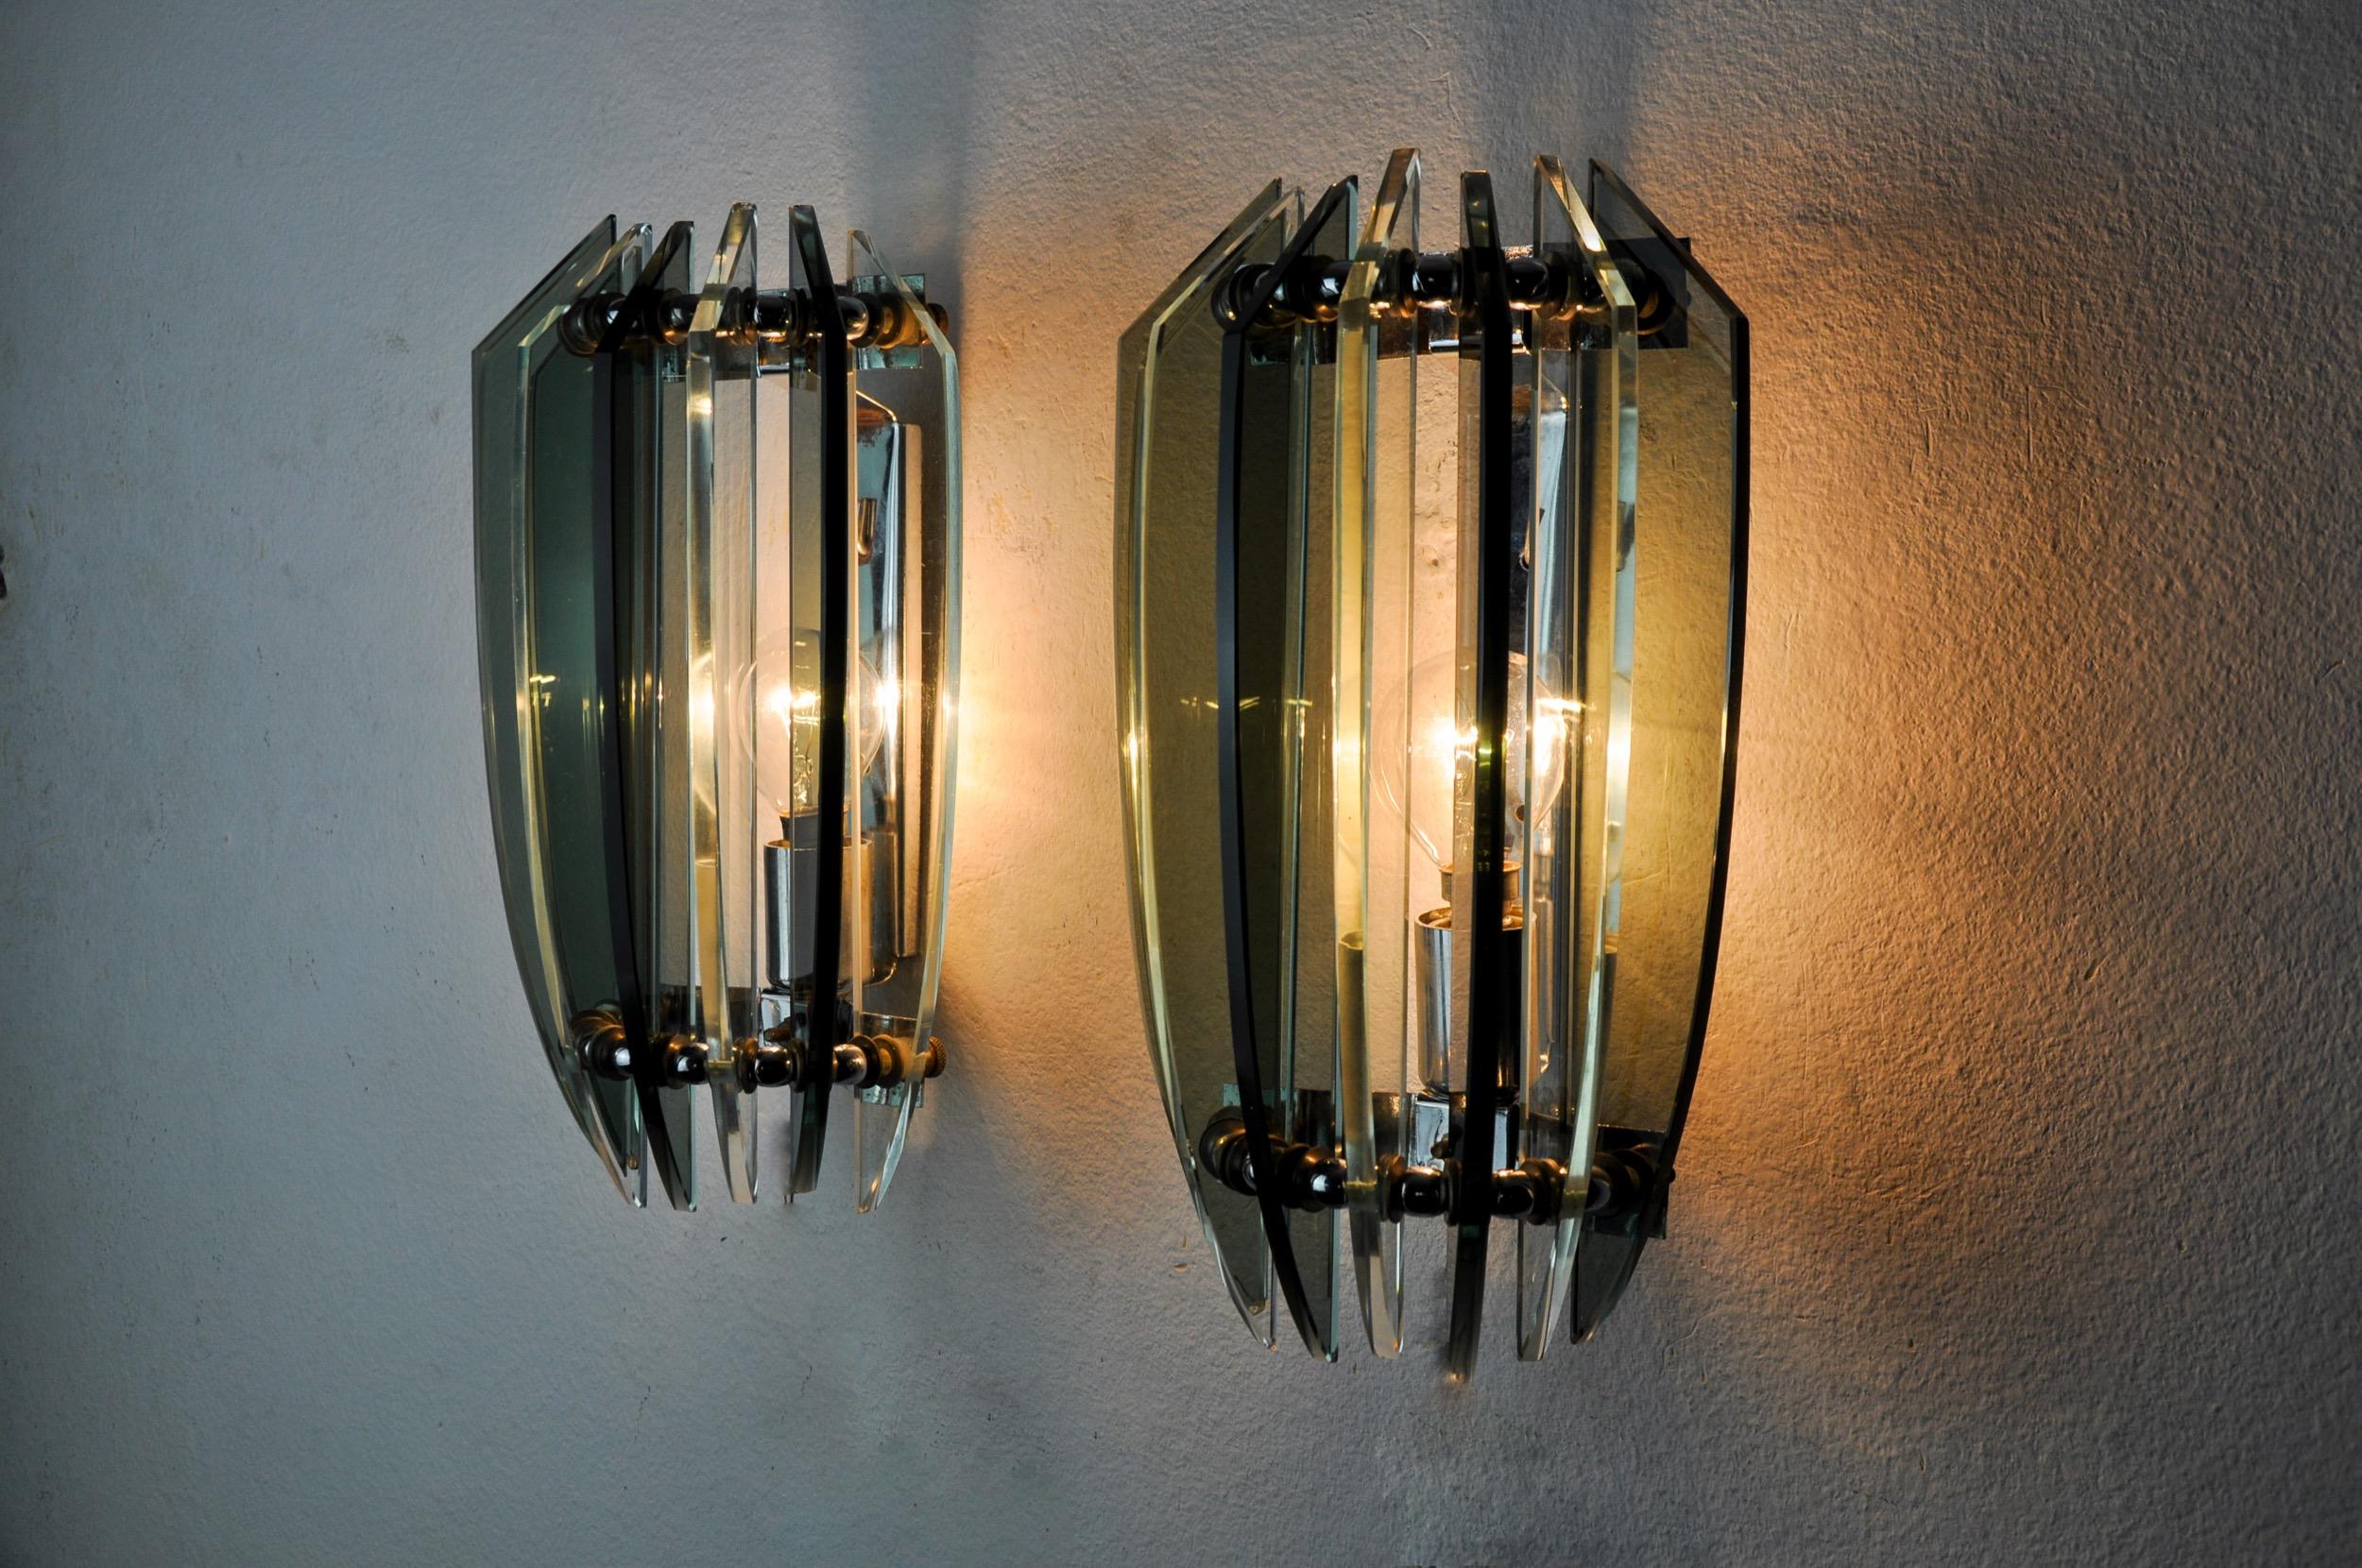 Superb and rare pair of two-tone veca wall lamps designated and produced in italy in the 70s. Wall lamps composed of green cut glass plates and a chromed metal structure. Unique object that will illuminate wonderfully and bring a real design touch